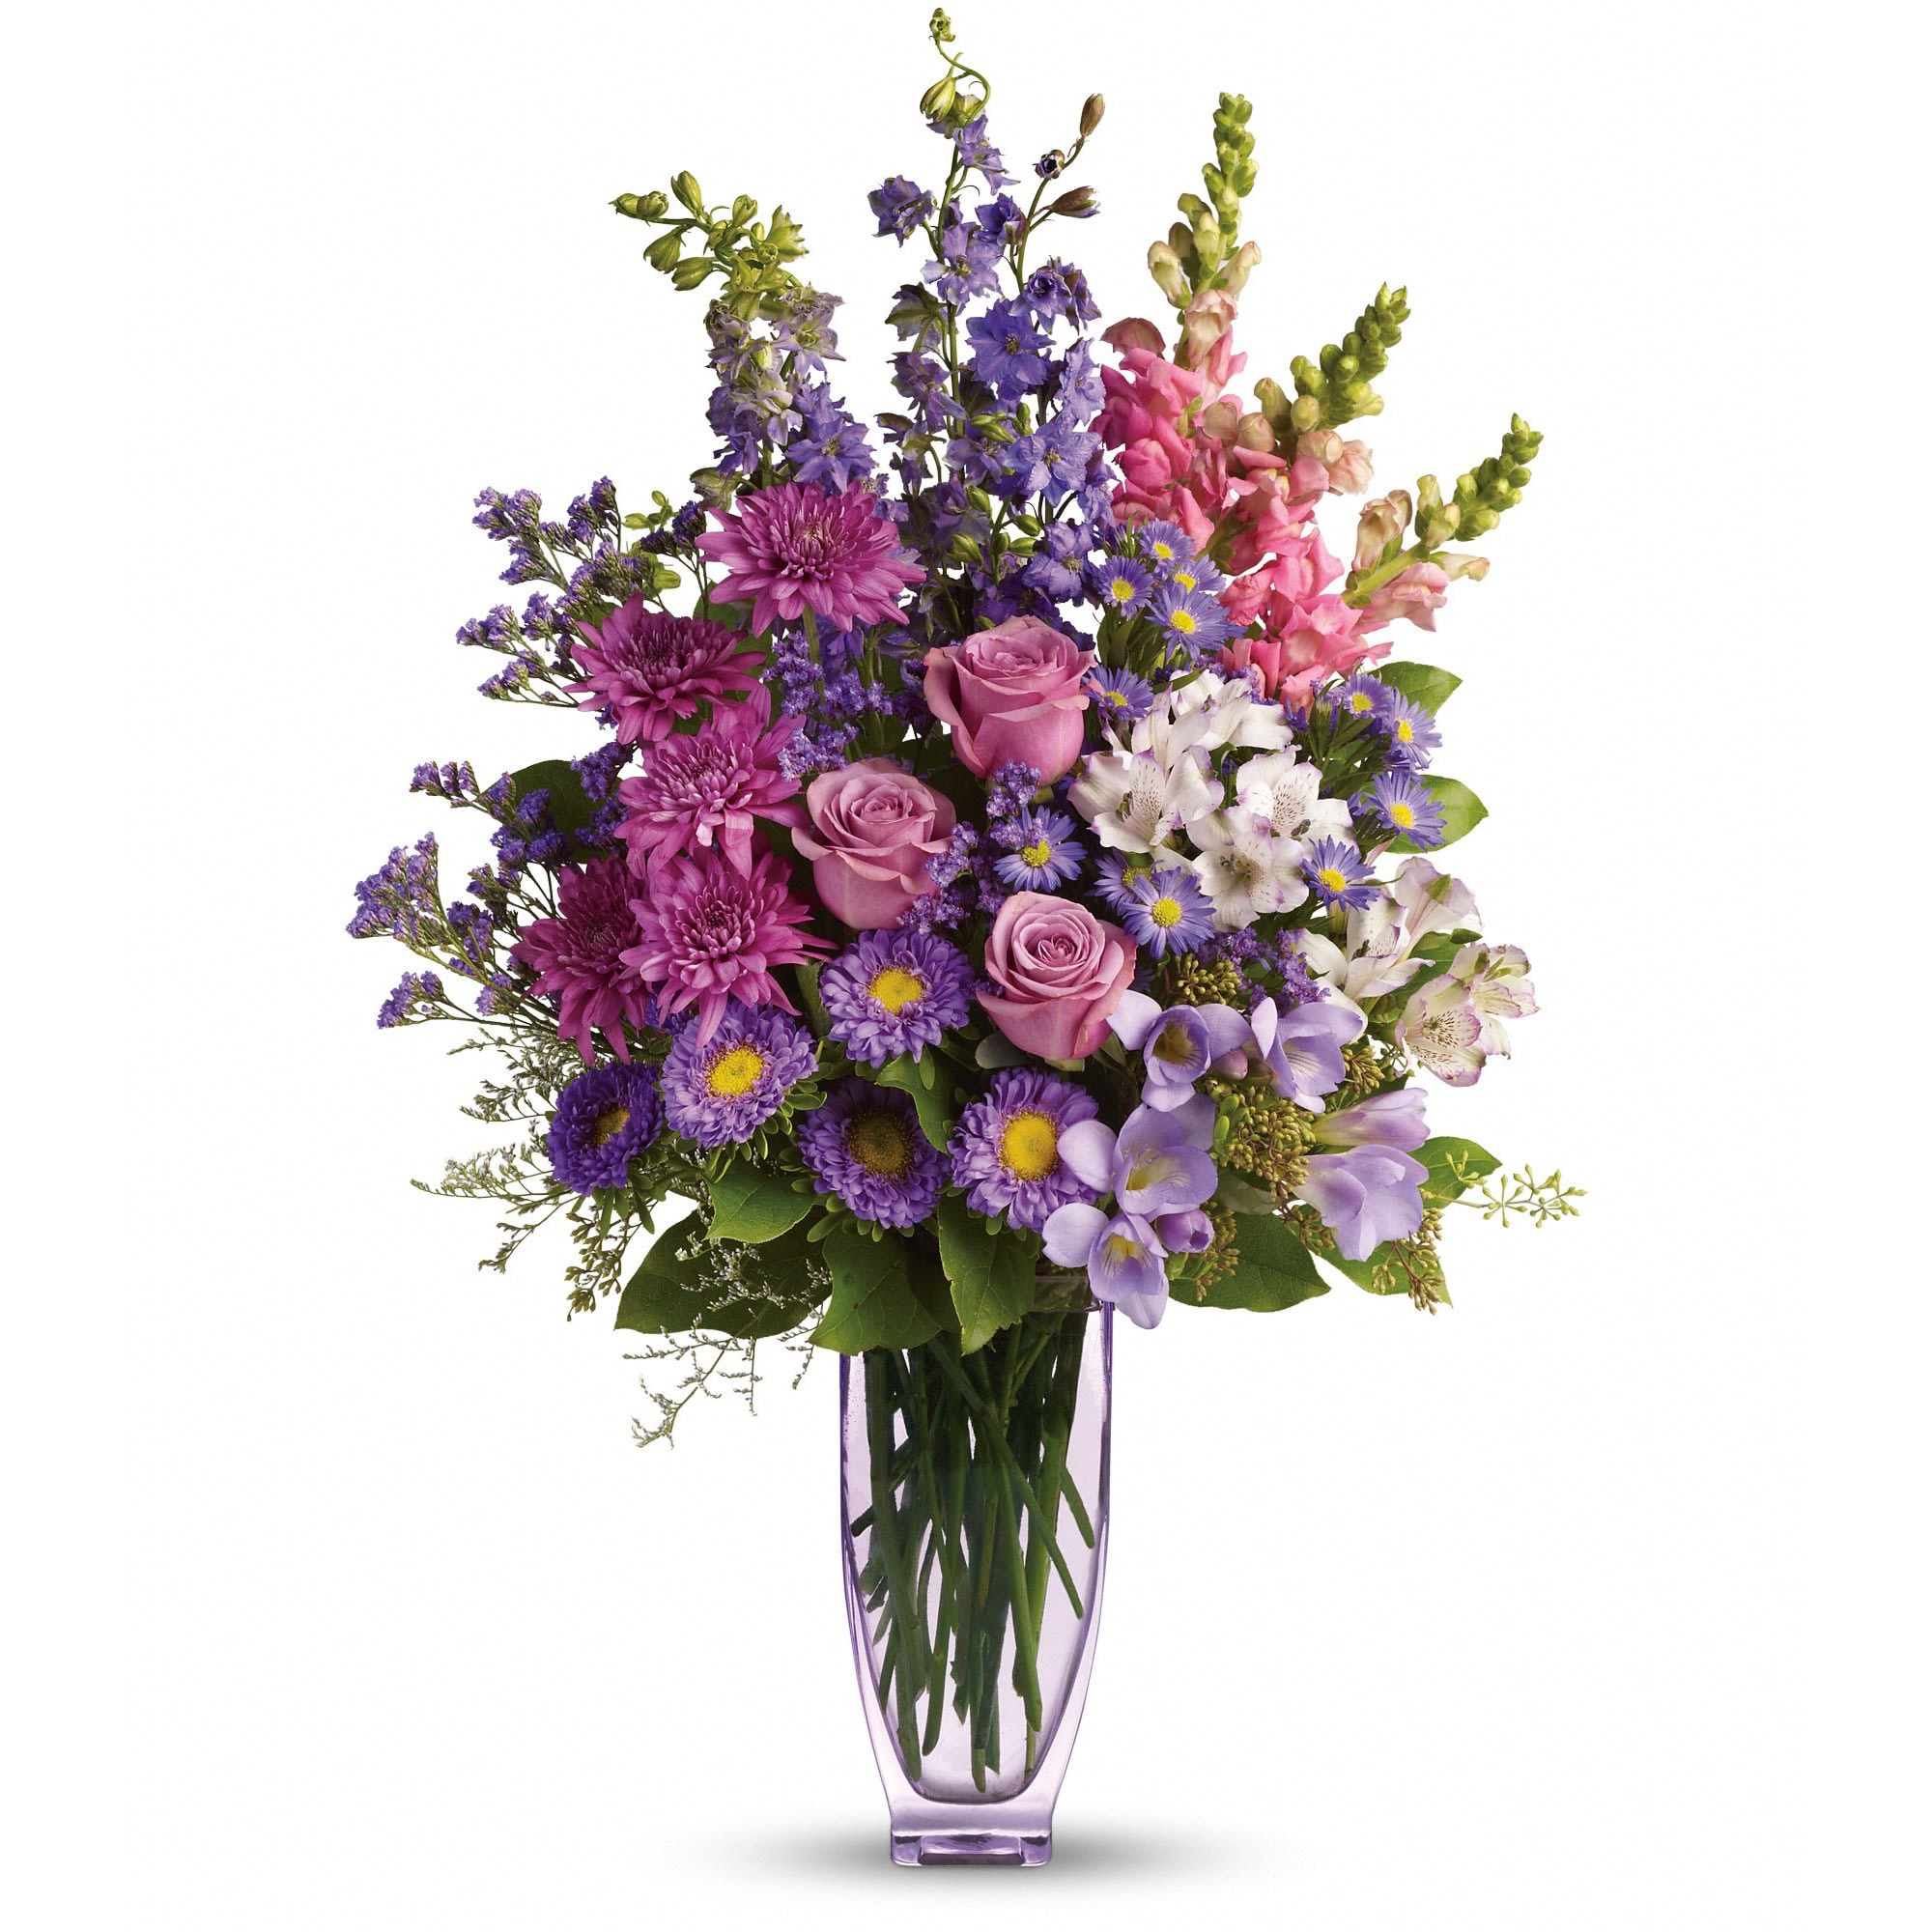 Steal The Show by Teleflora - You won't have to worry about any other bouquet upstaging this gift! At over two feet tall, this is a fabulous way to show someone how much they mean to you.